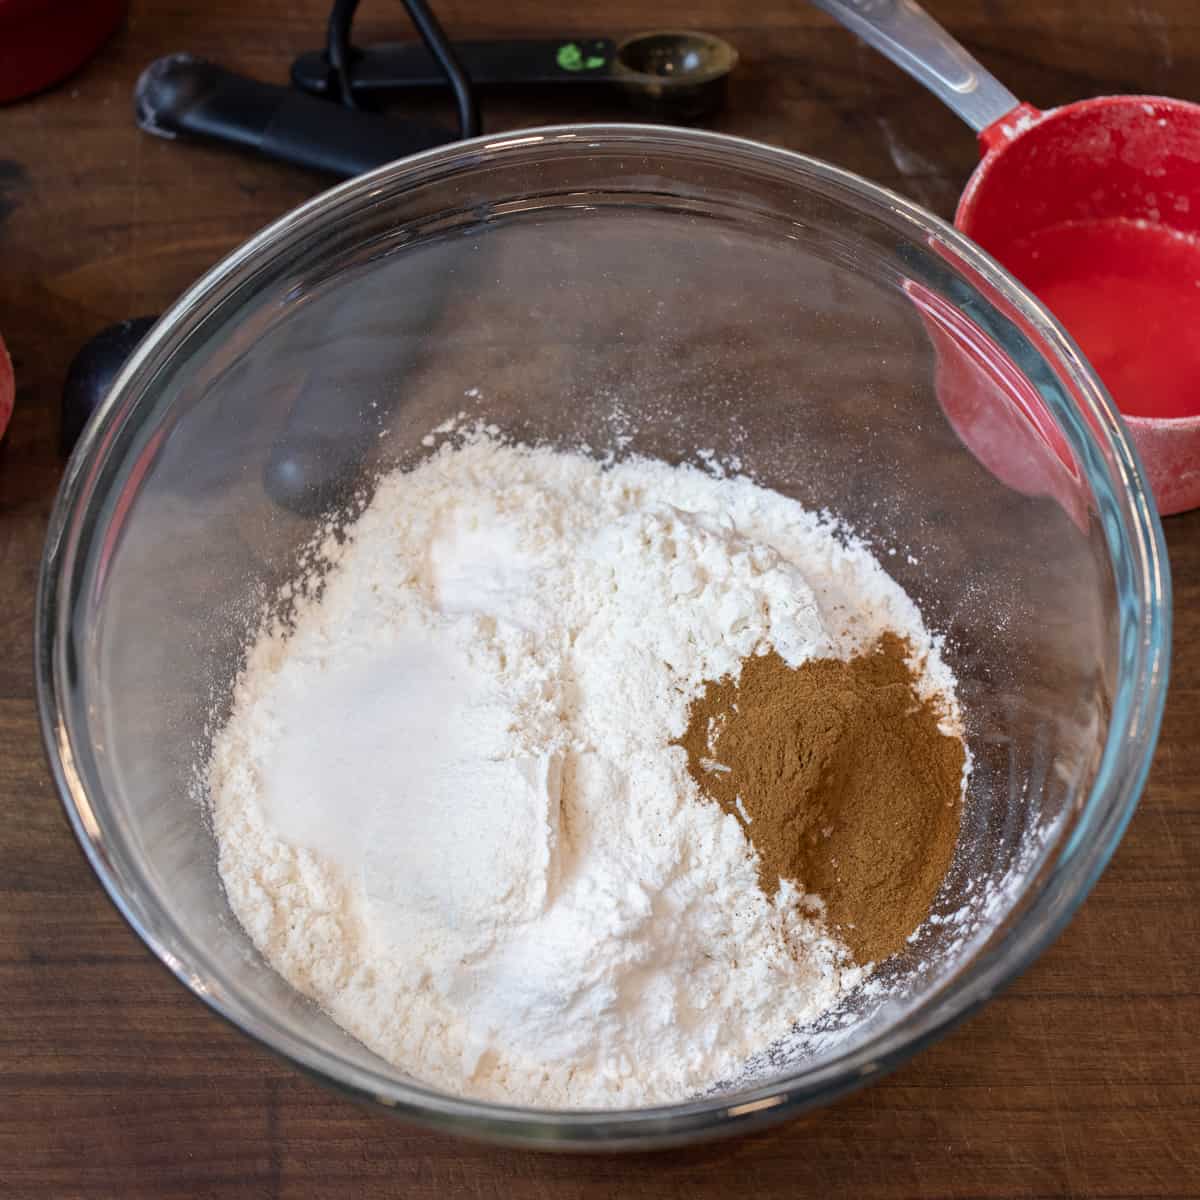 Flour and other dry ingredients in a glass bowl.